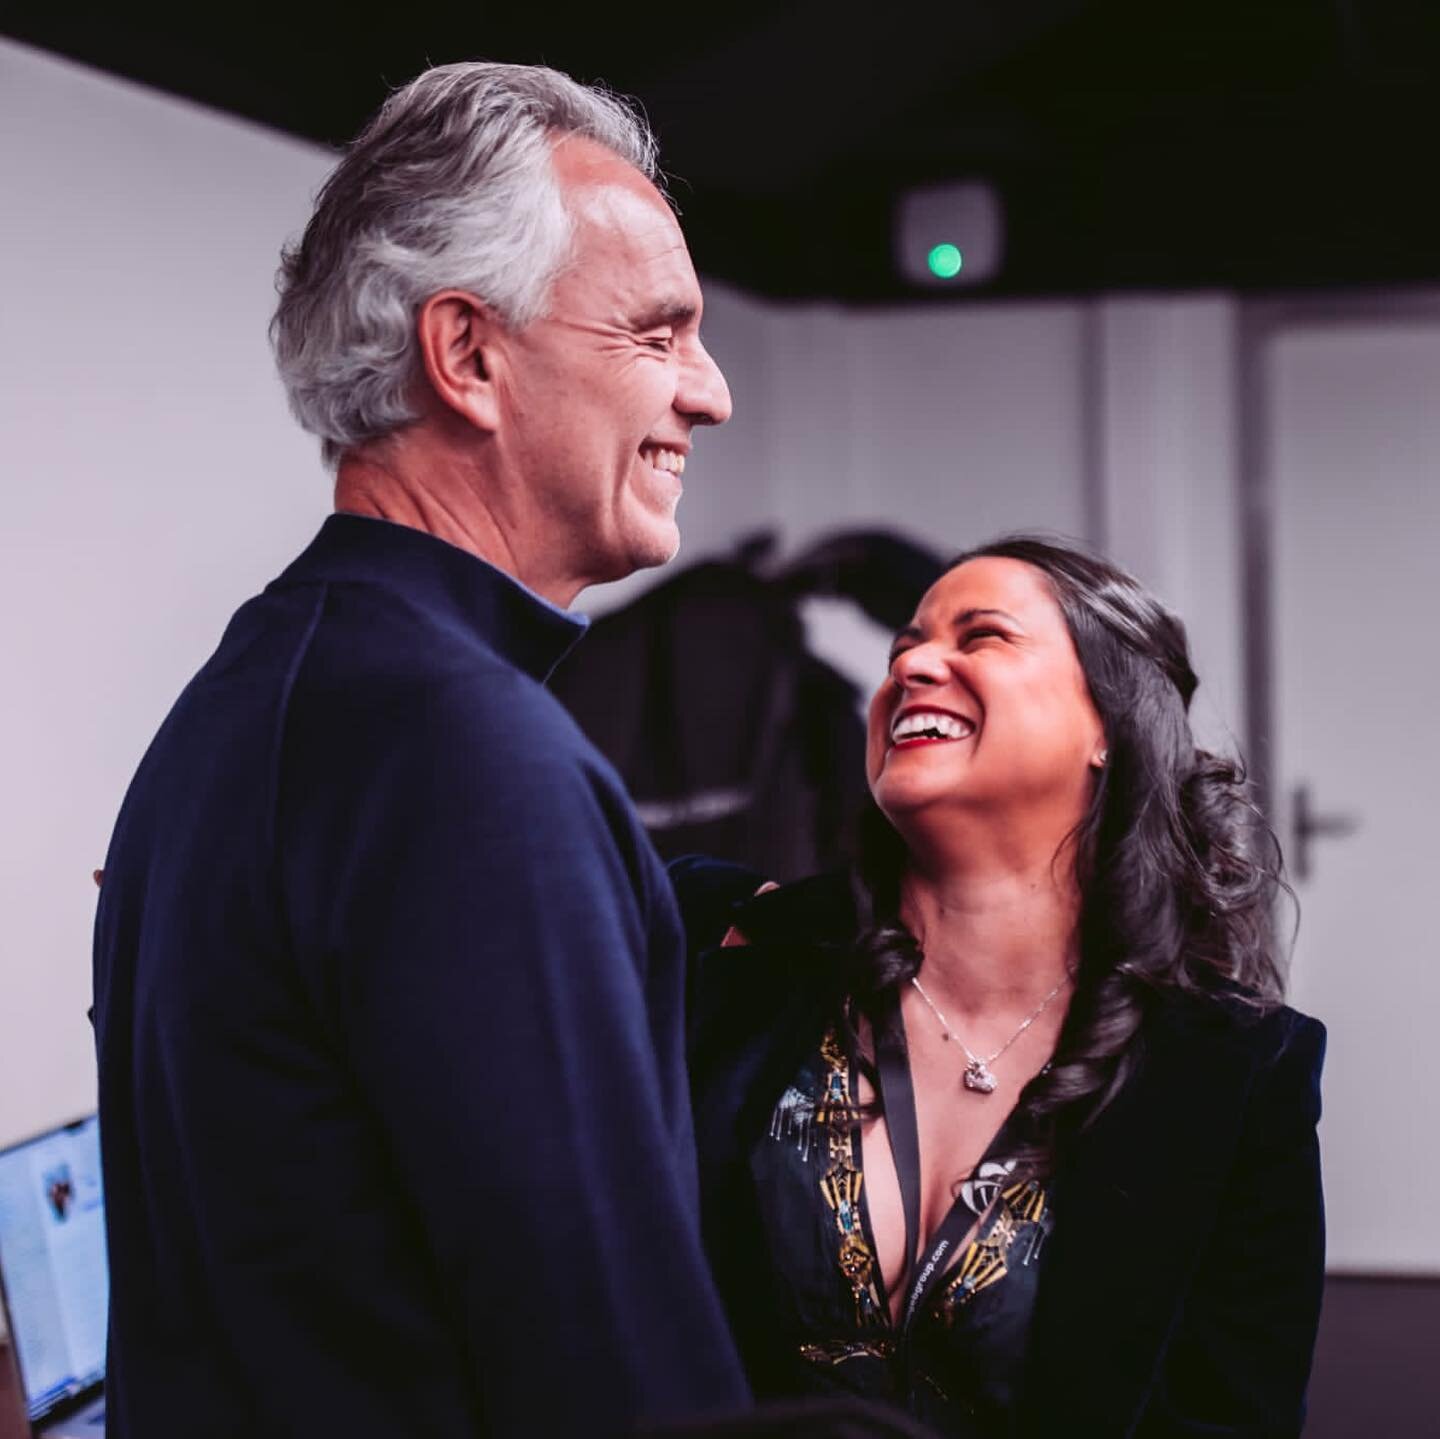 My heart is so full of gratitude. Last night I attended @andreabocelliofficial concert at the Hallenstadion in Z&uuml;rich. 

I was so fortunate to reconnect with Maestro, and he remembered me from the 2022 Australian Tour. One of the first things he